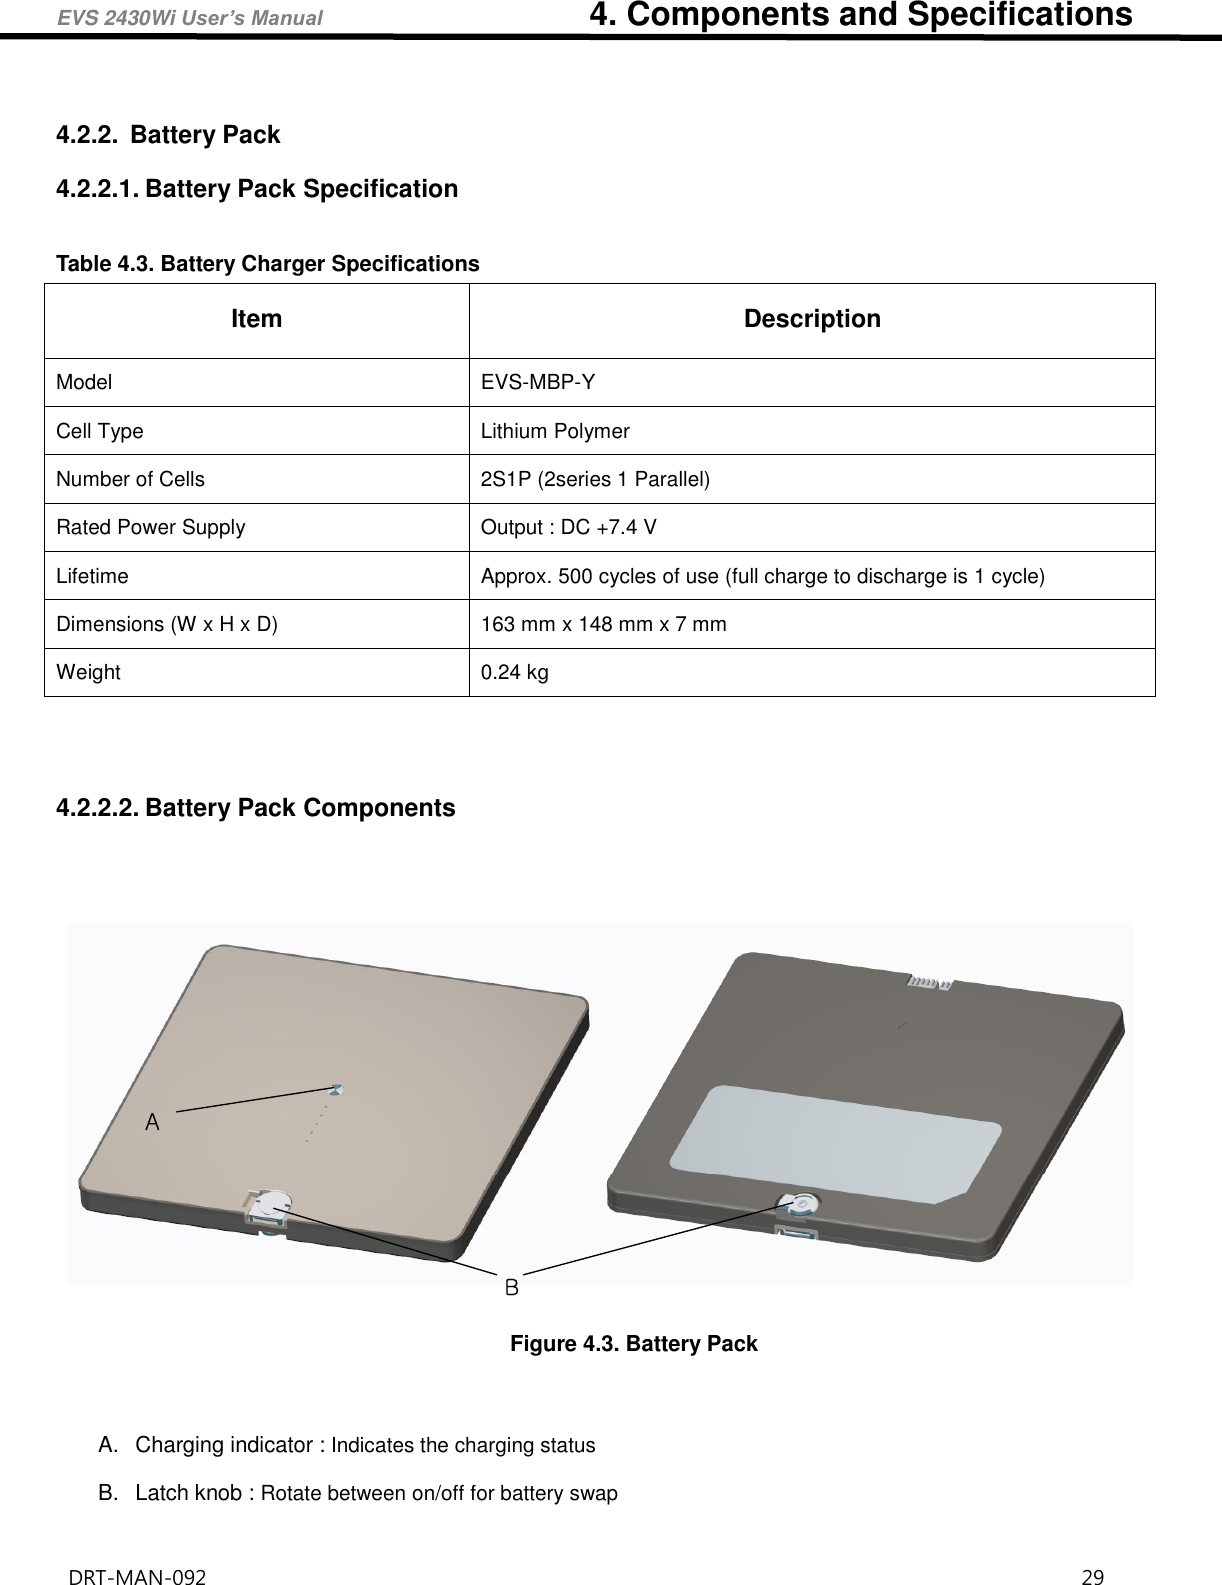 EVS 2430Wi User’s Manual                                4. Components and Specifications DRT-MAN-092                                                                                    29    4.2.2.  Battery Pack 4.2.2.1. Battery Pack Specification  Table 4.3. Battery Charger Specifications Item Description Model EVS-MBP-Y Cell Type   Lithium Polymer     Number of Cells 2S1P (2series 1 Parallel) Rated Power Supply Output : DC +7.4 V   Lifetime Approx. 500 cycles of use (full charge to discharge is 1 cycle)   Dimensions (W x H x D) 163 mm x 148 mm x 7 mm Weight 0.24 kg     4.2.2.2. Battery Pack Components    AB Figure 4.3. Battery Pack    A.  Charging indicator : Indicates the charging status  B.  Latch knob : Rotate between on/off for battery swap   